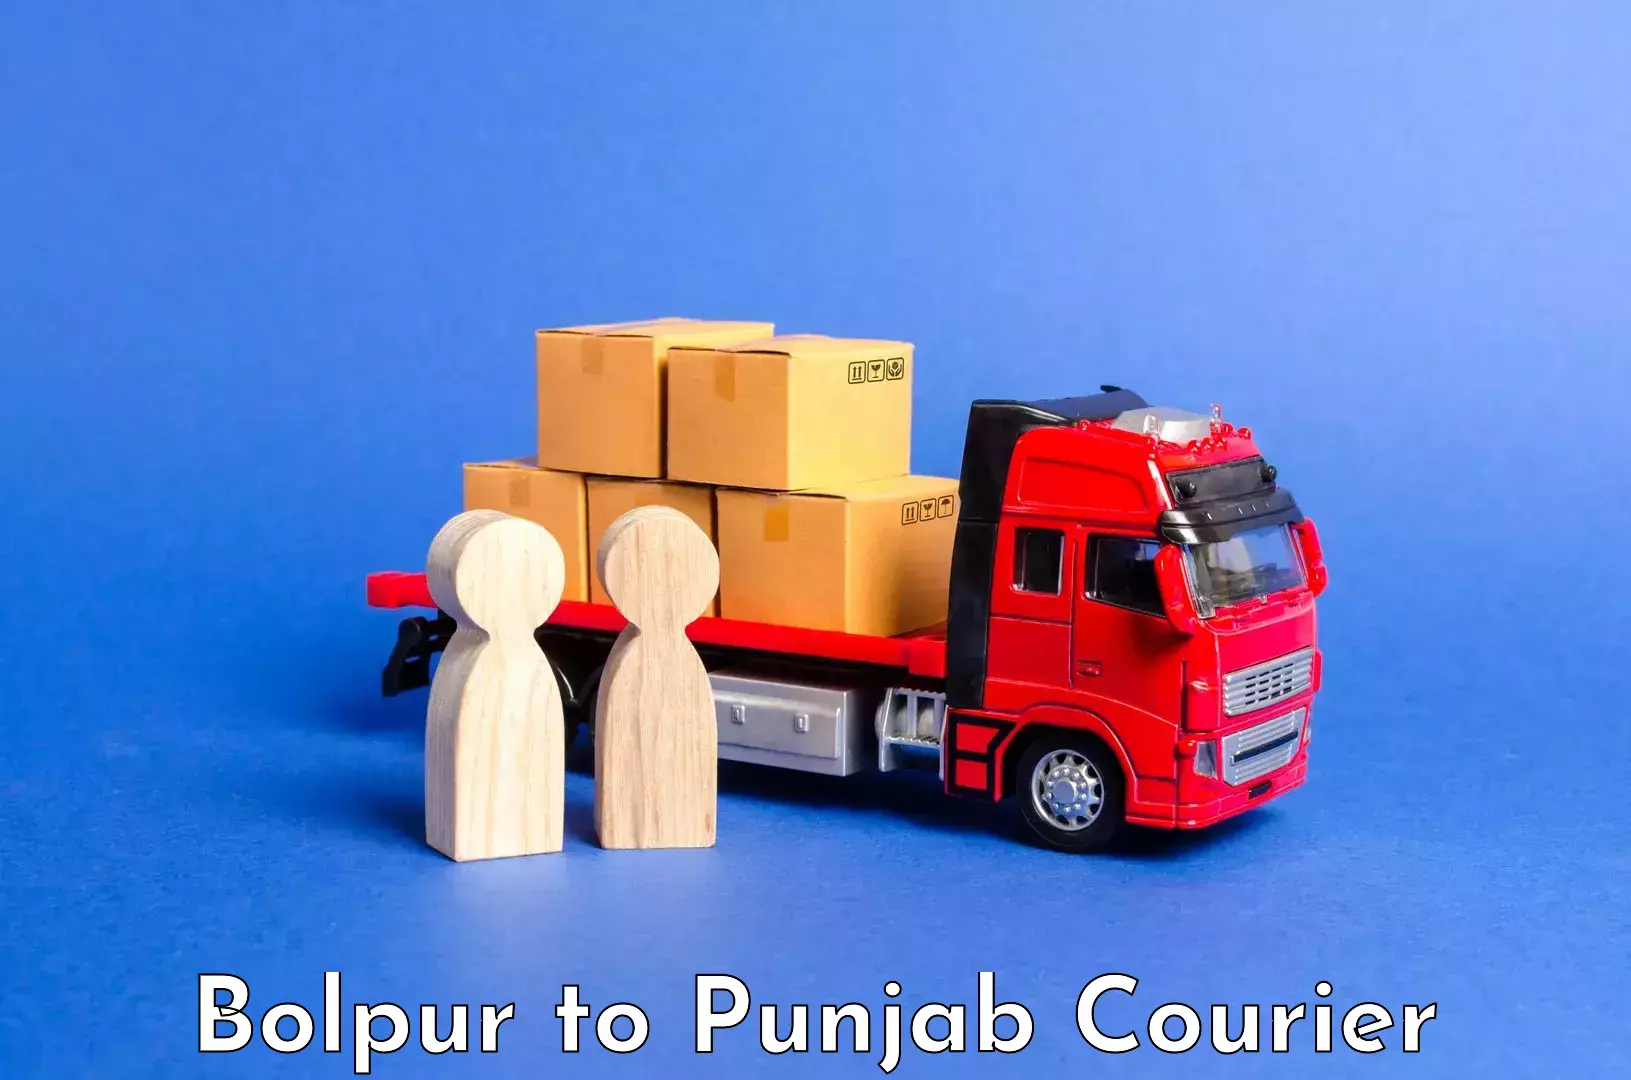 Luggage shipping specialists Bolpur to Punjab